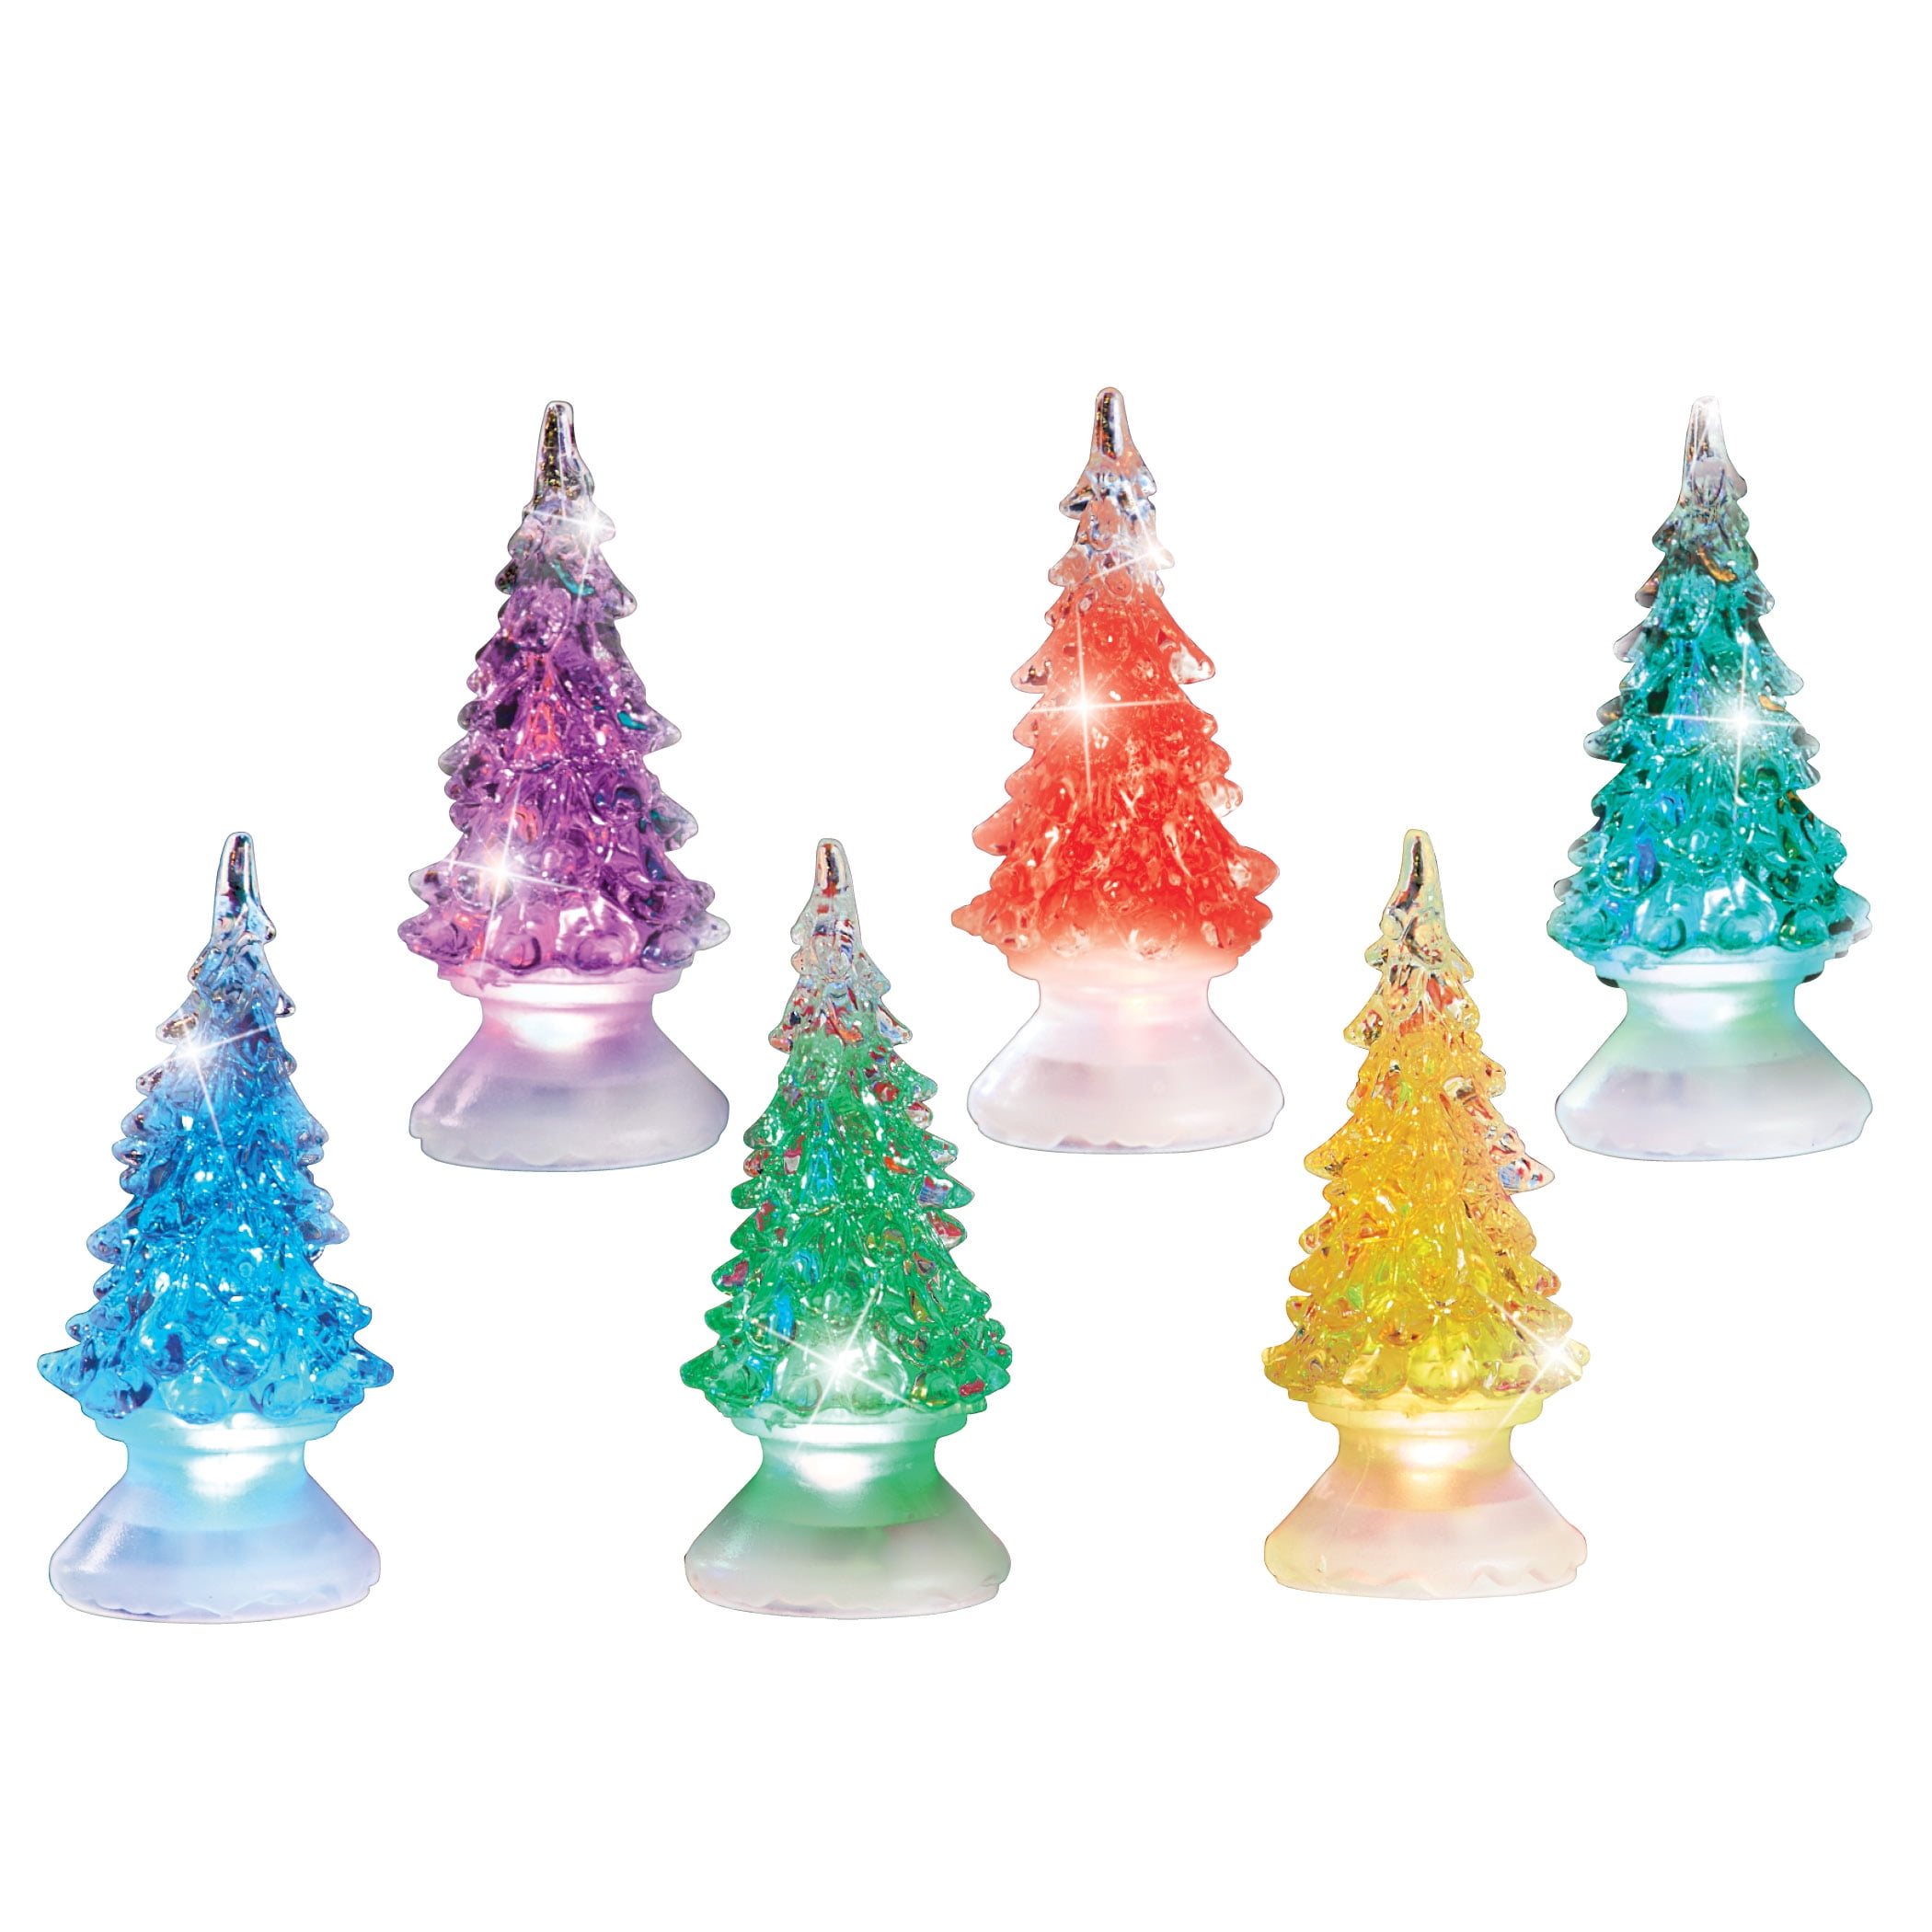 COLOR-CHANGING HOLIDAY DECOR